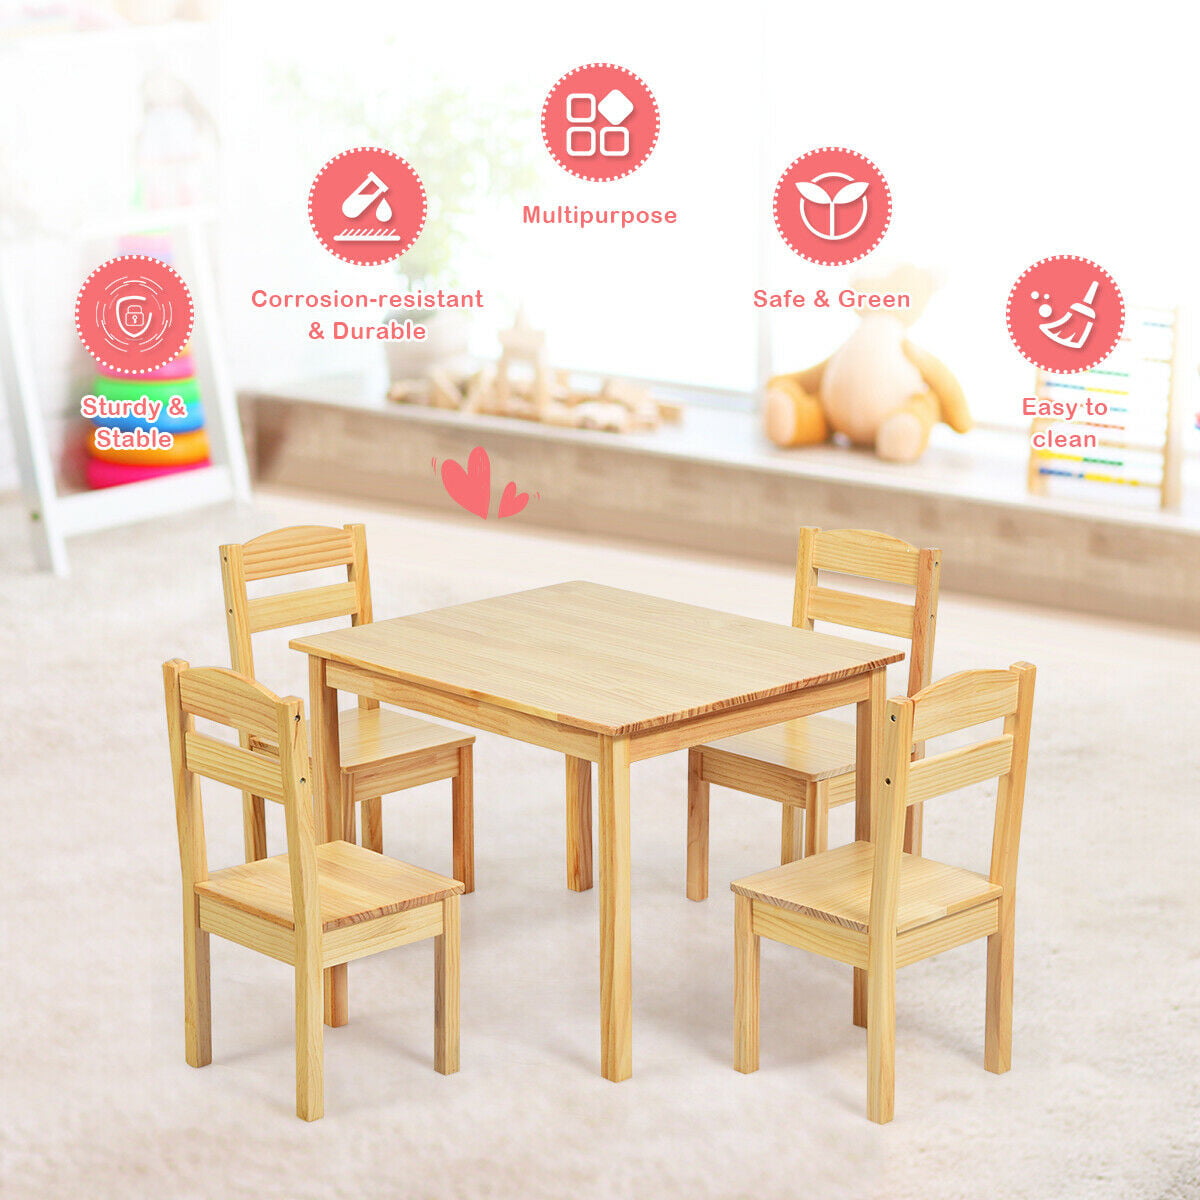 for Indoor and Outdoor use | 5 pcs Kids Pine Wood Table Chair Set Kid Playroom Dining Picnic Furniture Set Lightweight Durable Sturdy Solid Wooden 4 Chairs and 1 Activity Table Natural 